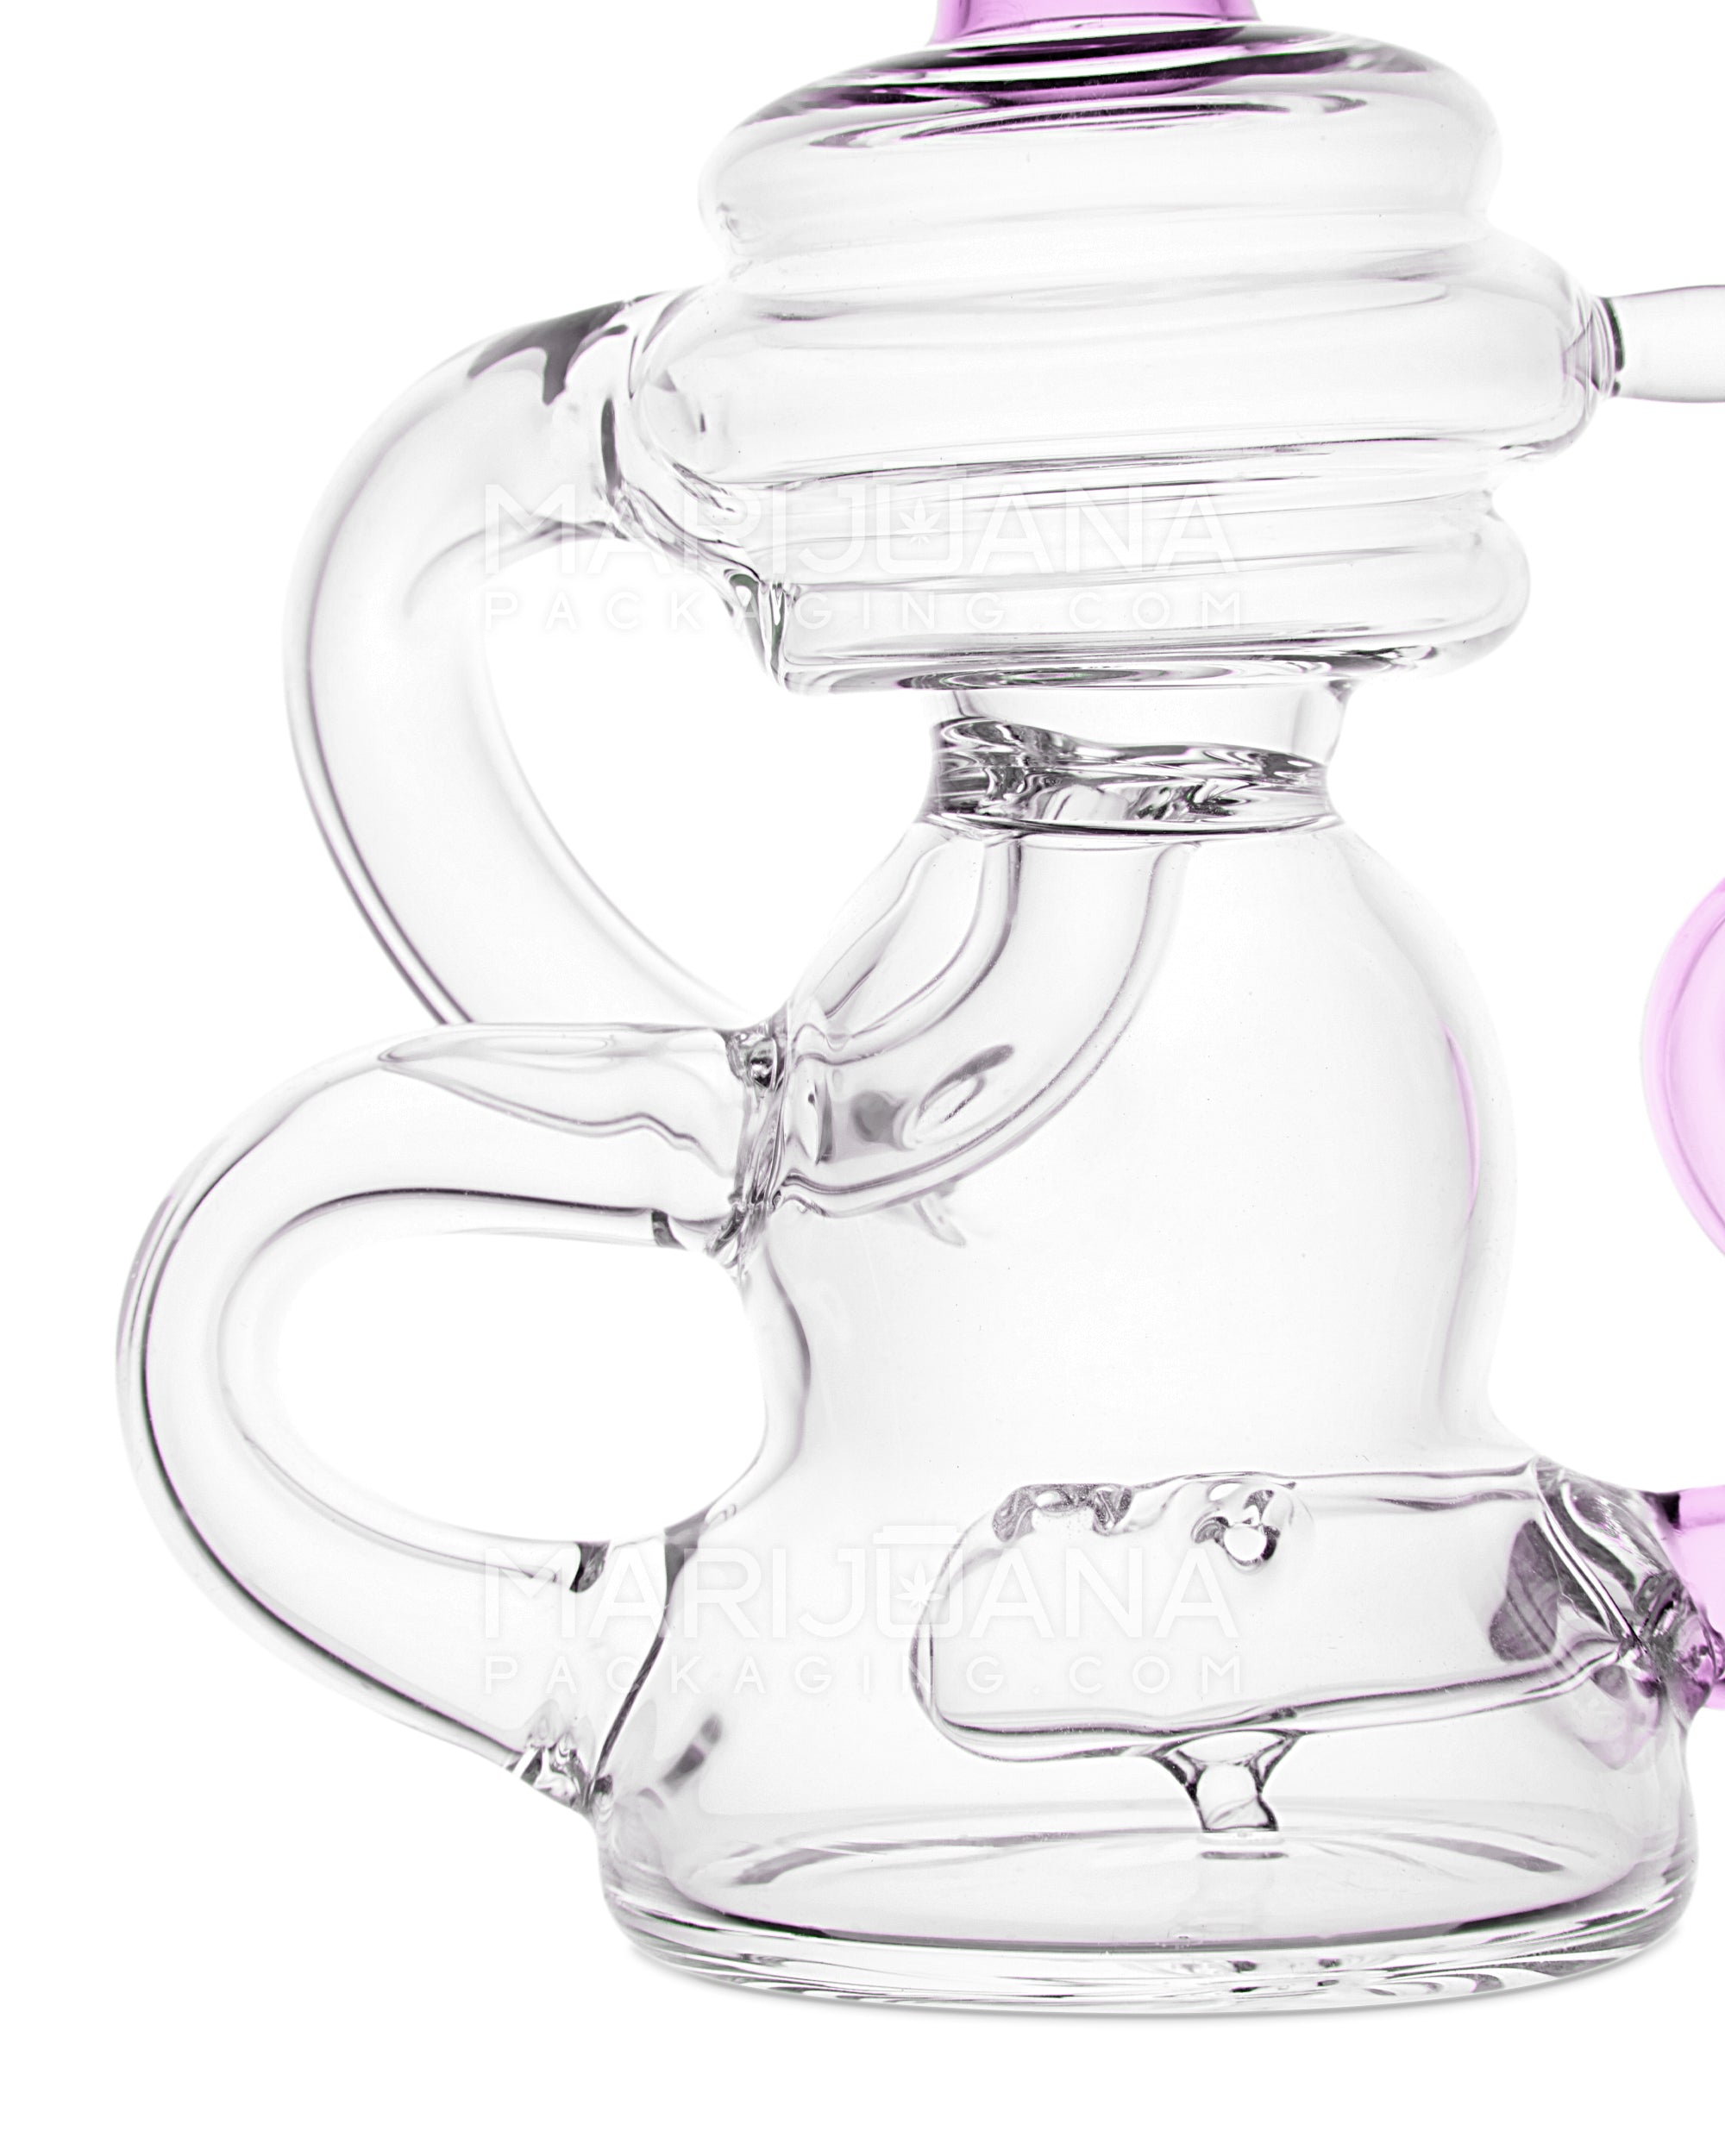 USA Glass | Bent Neck Mini Recycler Water Pipe w/ Inline Perc | 6.5in Tall - 14mm Bowl - Pink